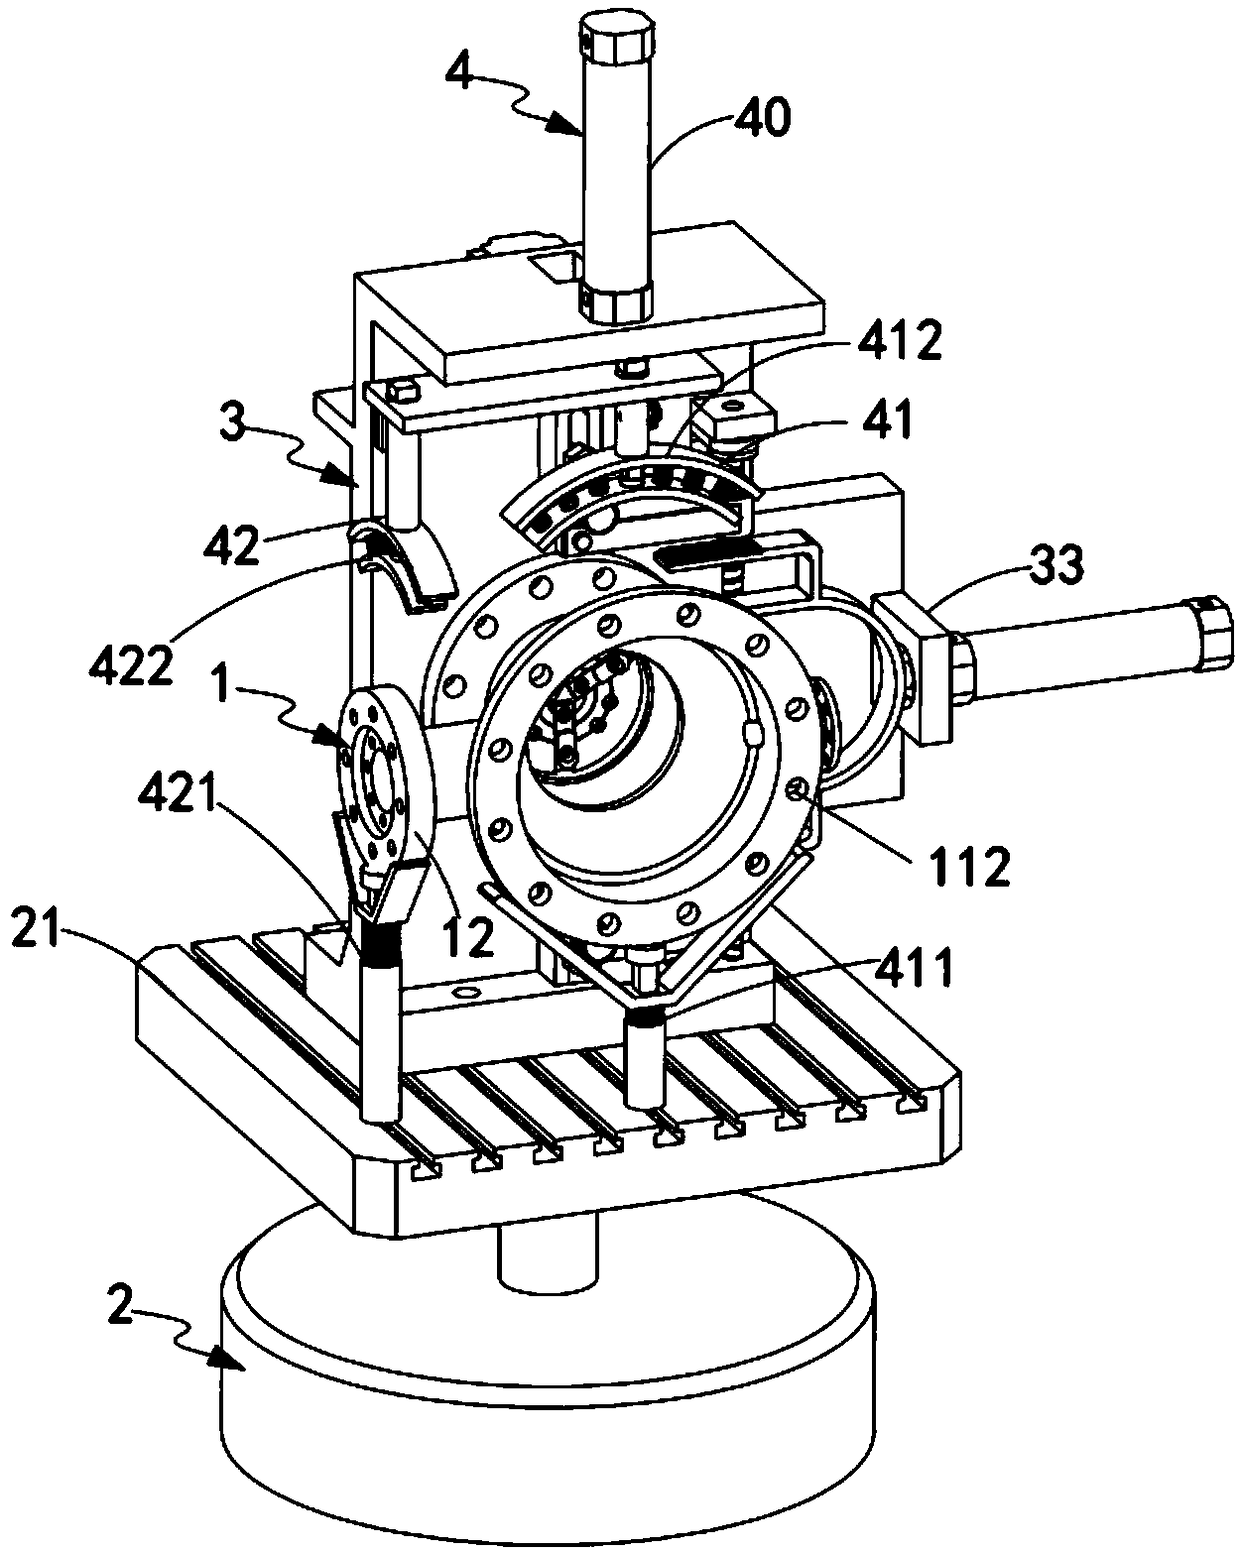 Fourth-axis rotary indexing processing device for special processing center of valve body